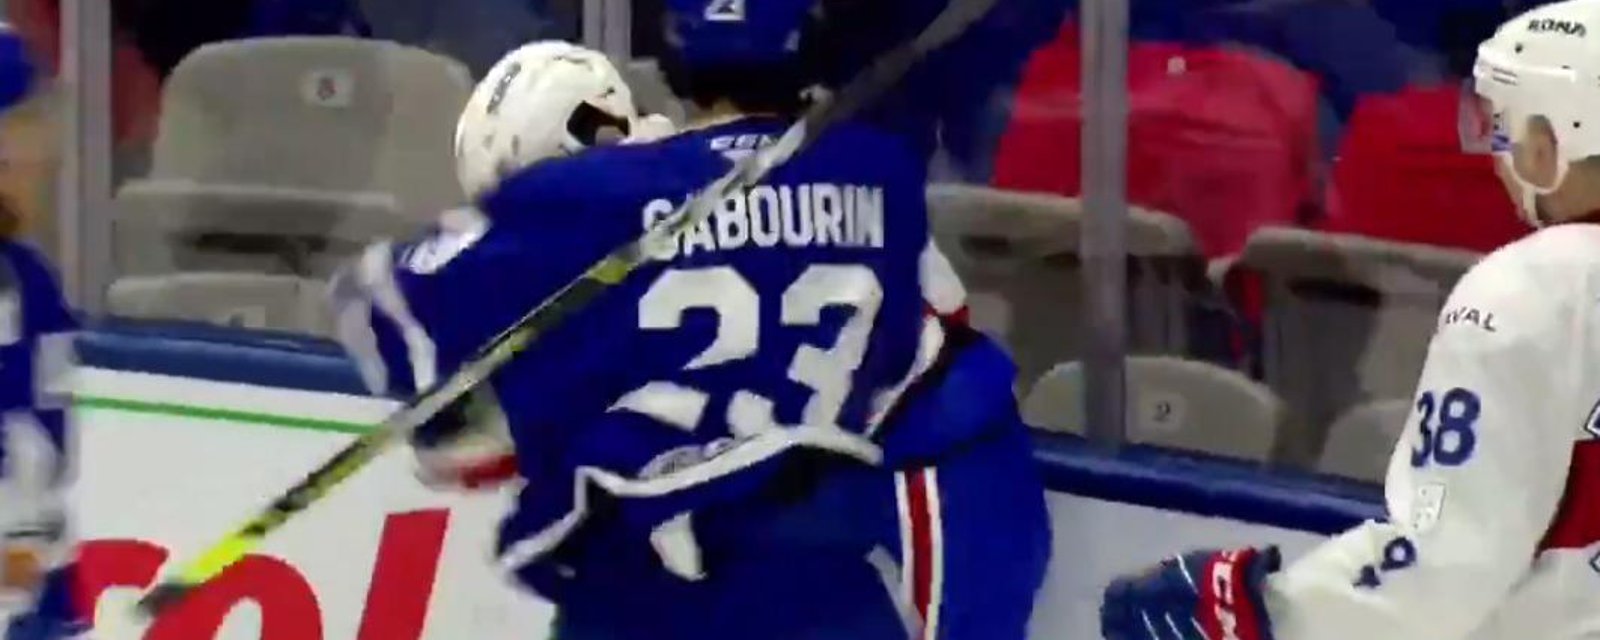 Scott Sabourin ejected during the first shift, of his first game, with the Marlies.